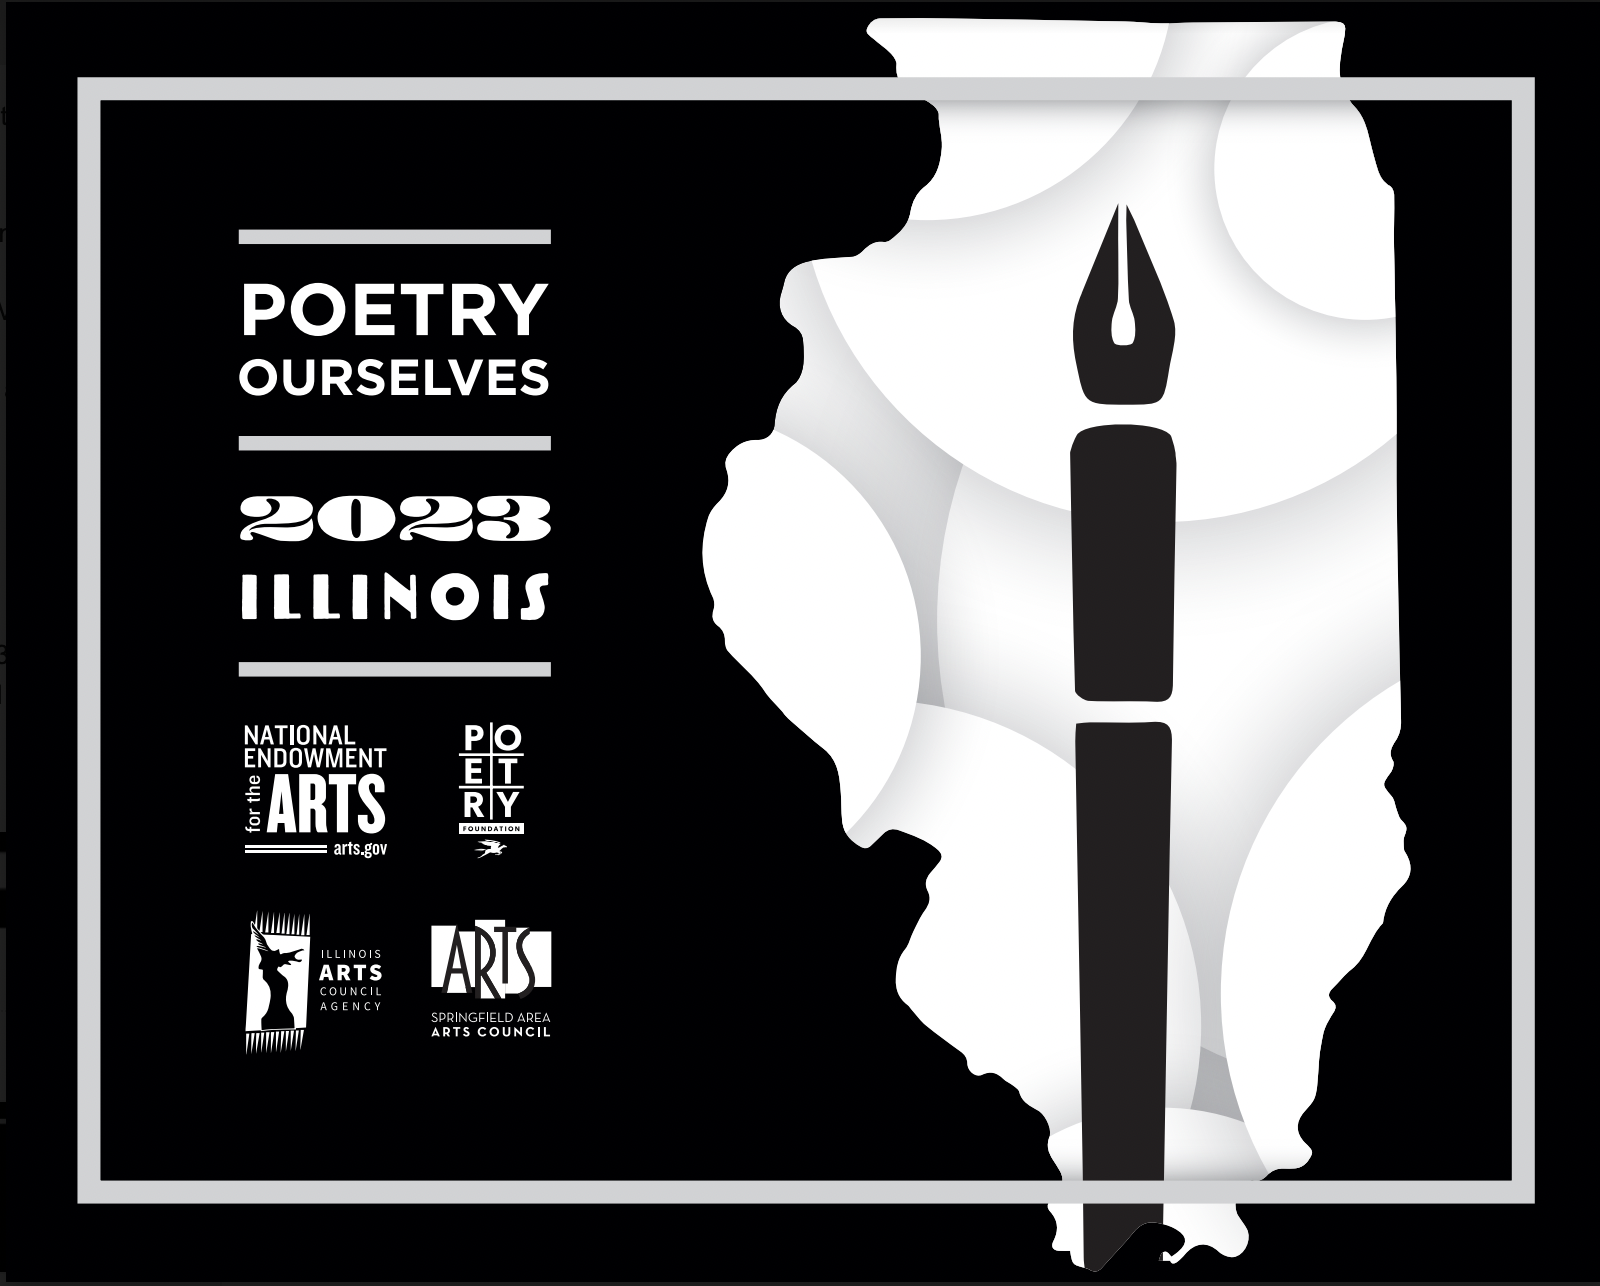 Poetry Ourselves 2023 Illinois. National Endowment for the Arts. The Poetry Foundation. Arts Alliance Illinois. Springfield Area Arts Council.